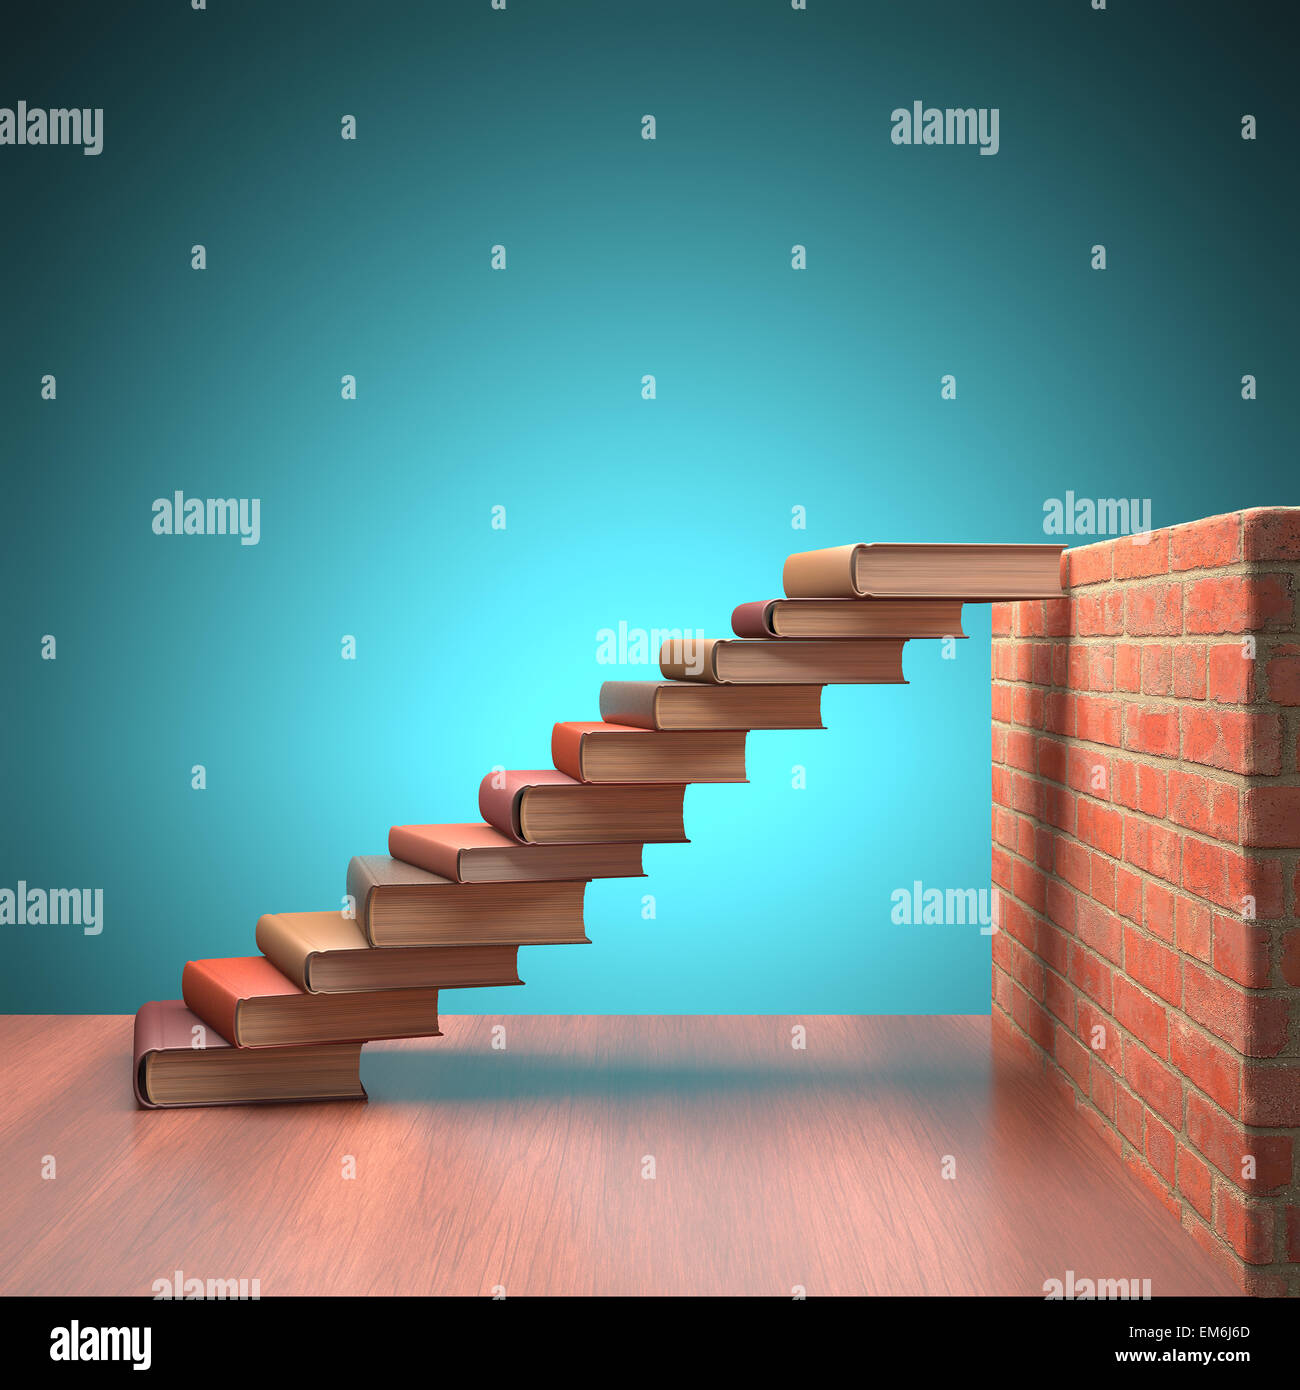 Stairs made of books on a concept of learning and achievement of success. Stock Photo